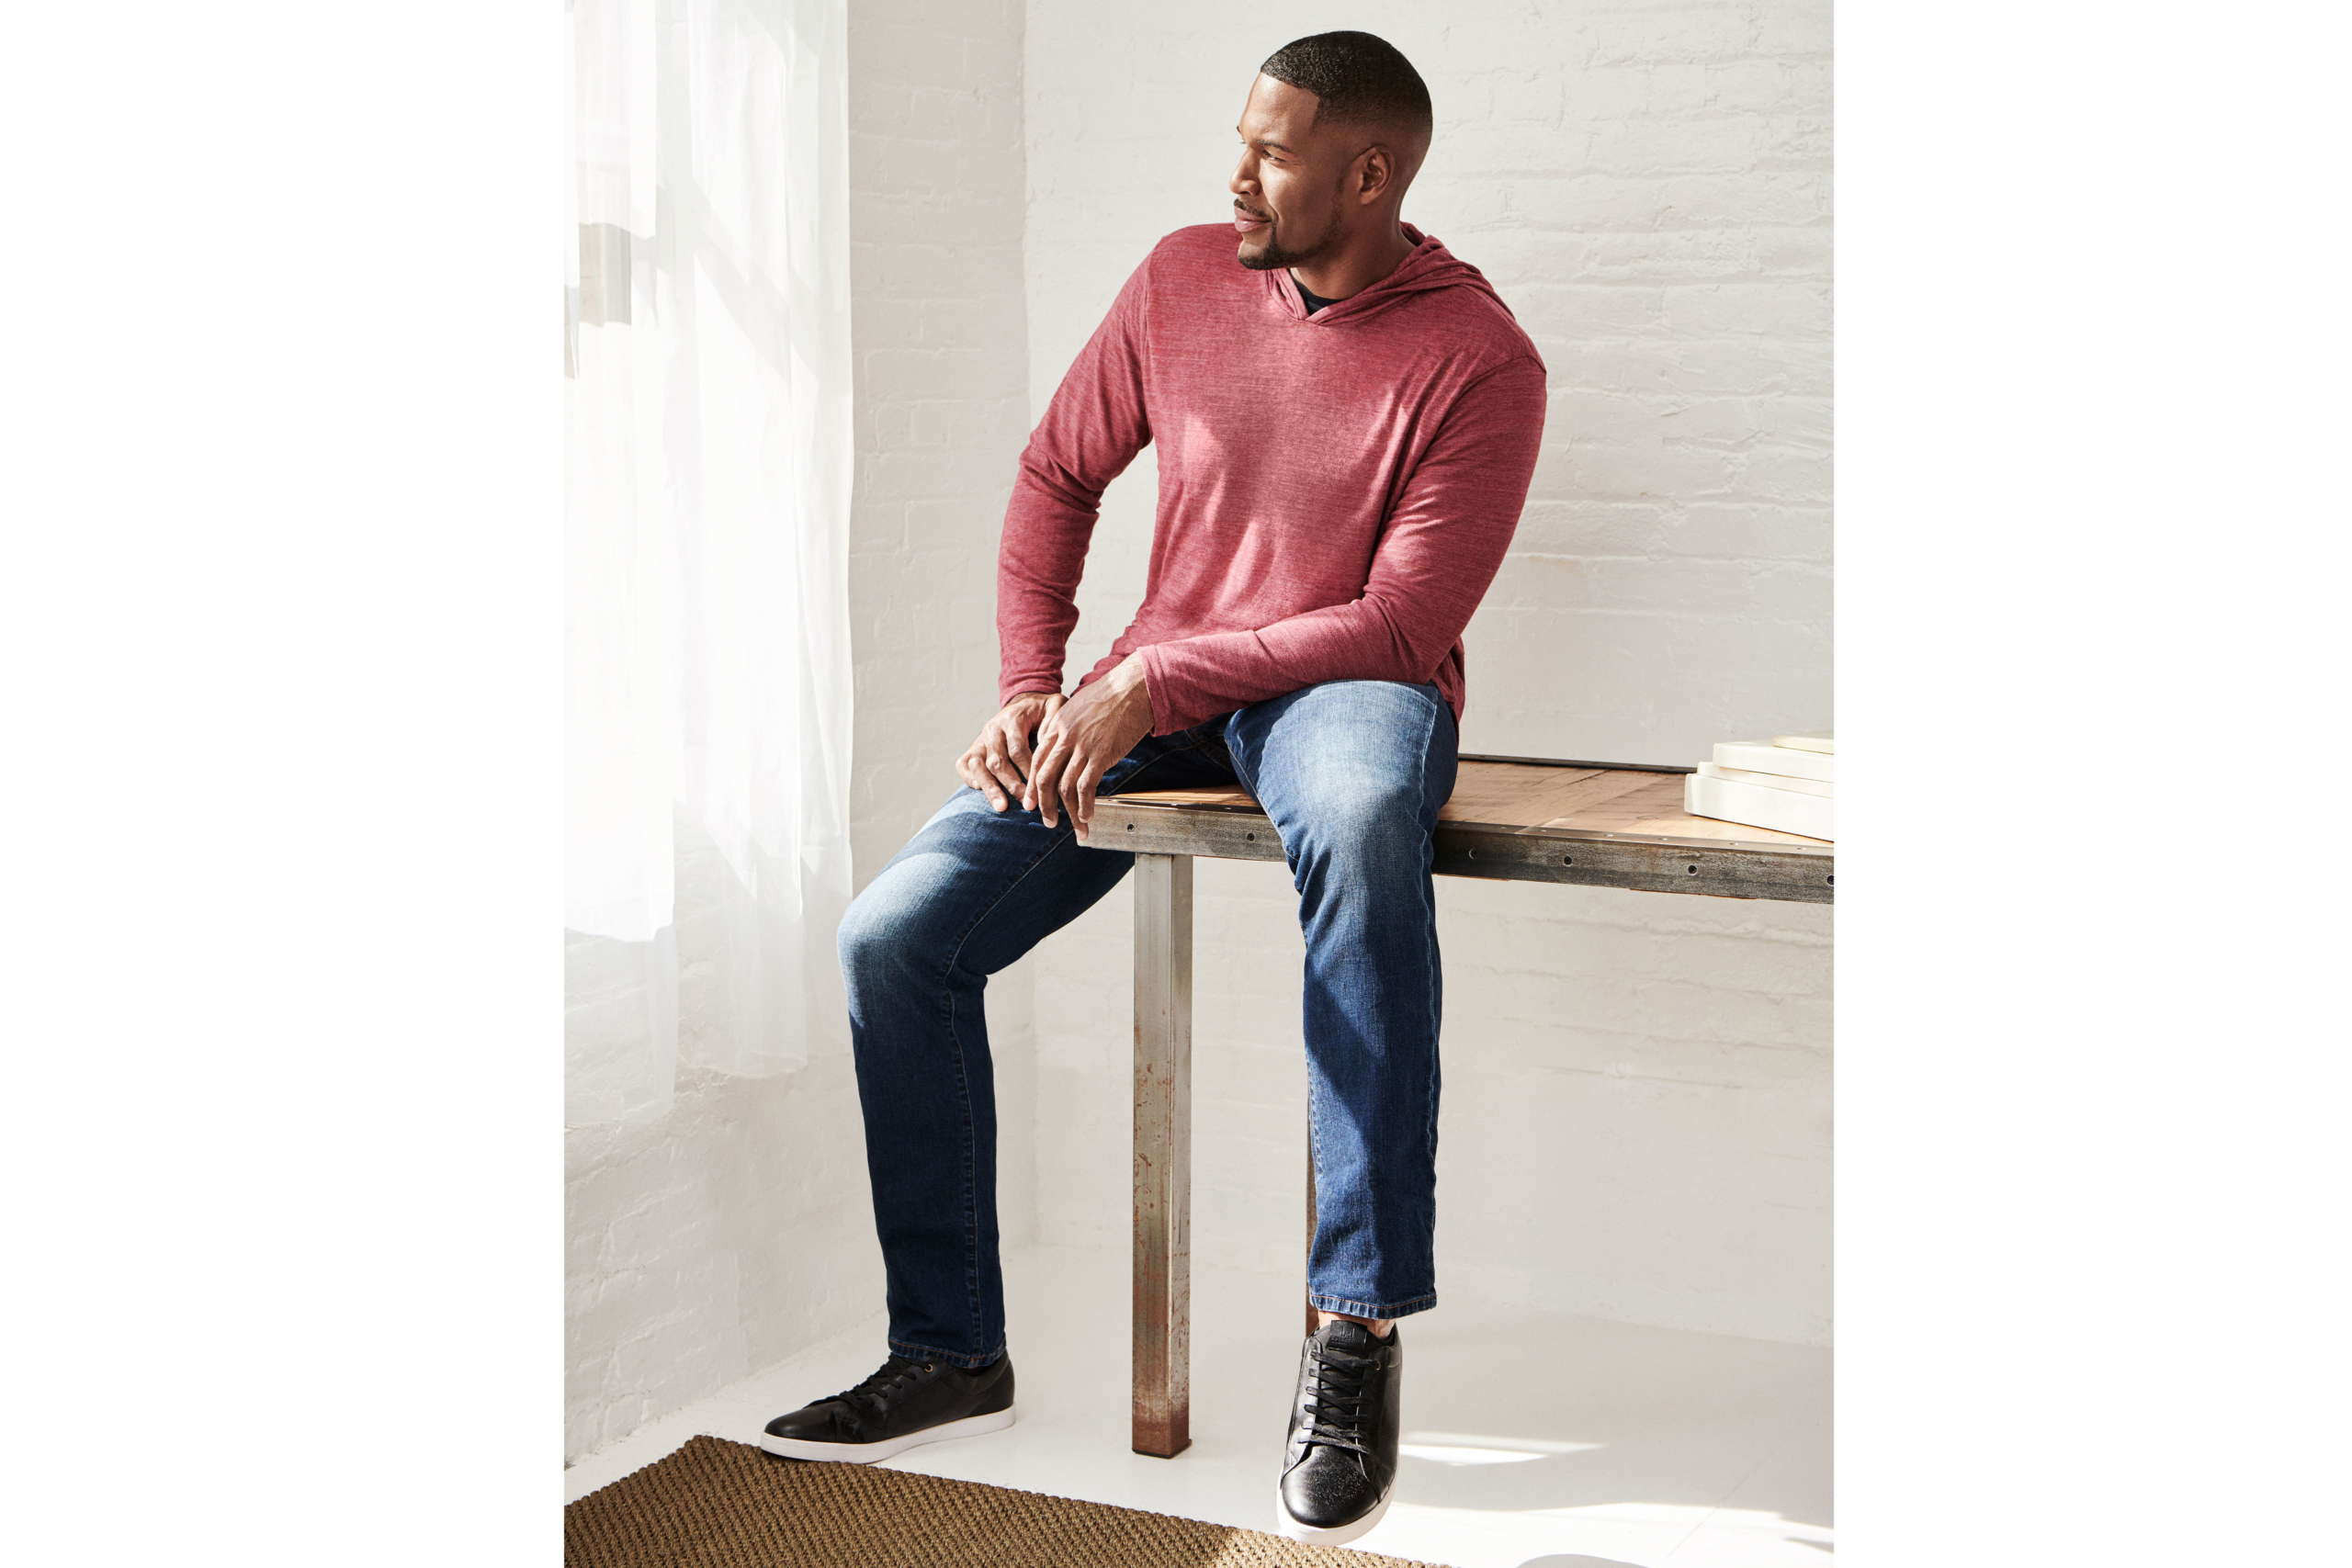 How Michael Strahan Is Building His Fashion Empire The Manual 